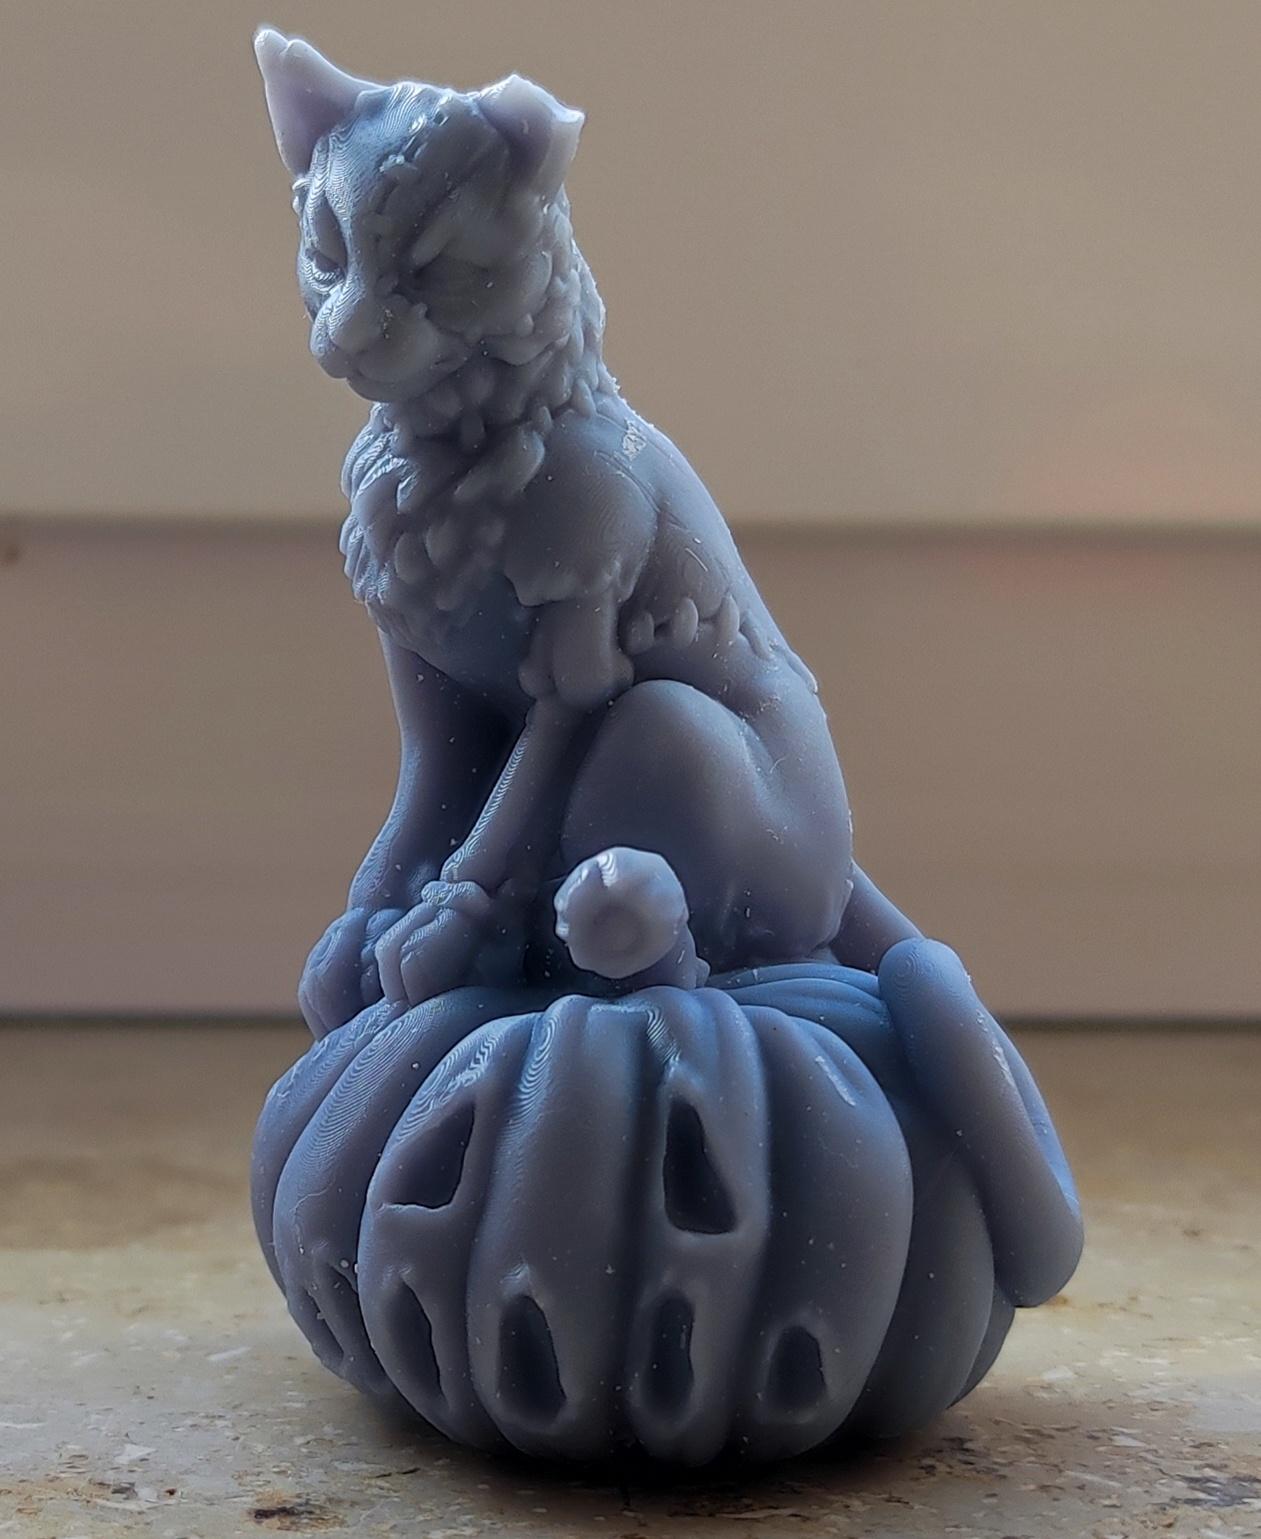 Stiches - Zombie cat on a jack-o-lantern - Decoration - Printed in Resin, using the Anycubic Photon Mono X with Anycubic Standard Resin Grey - 3d model